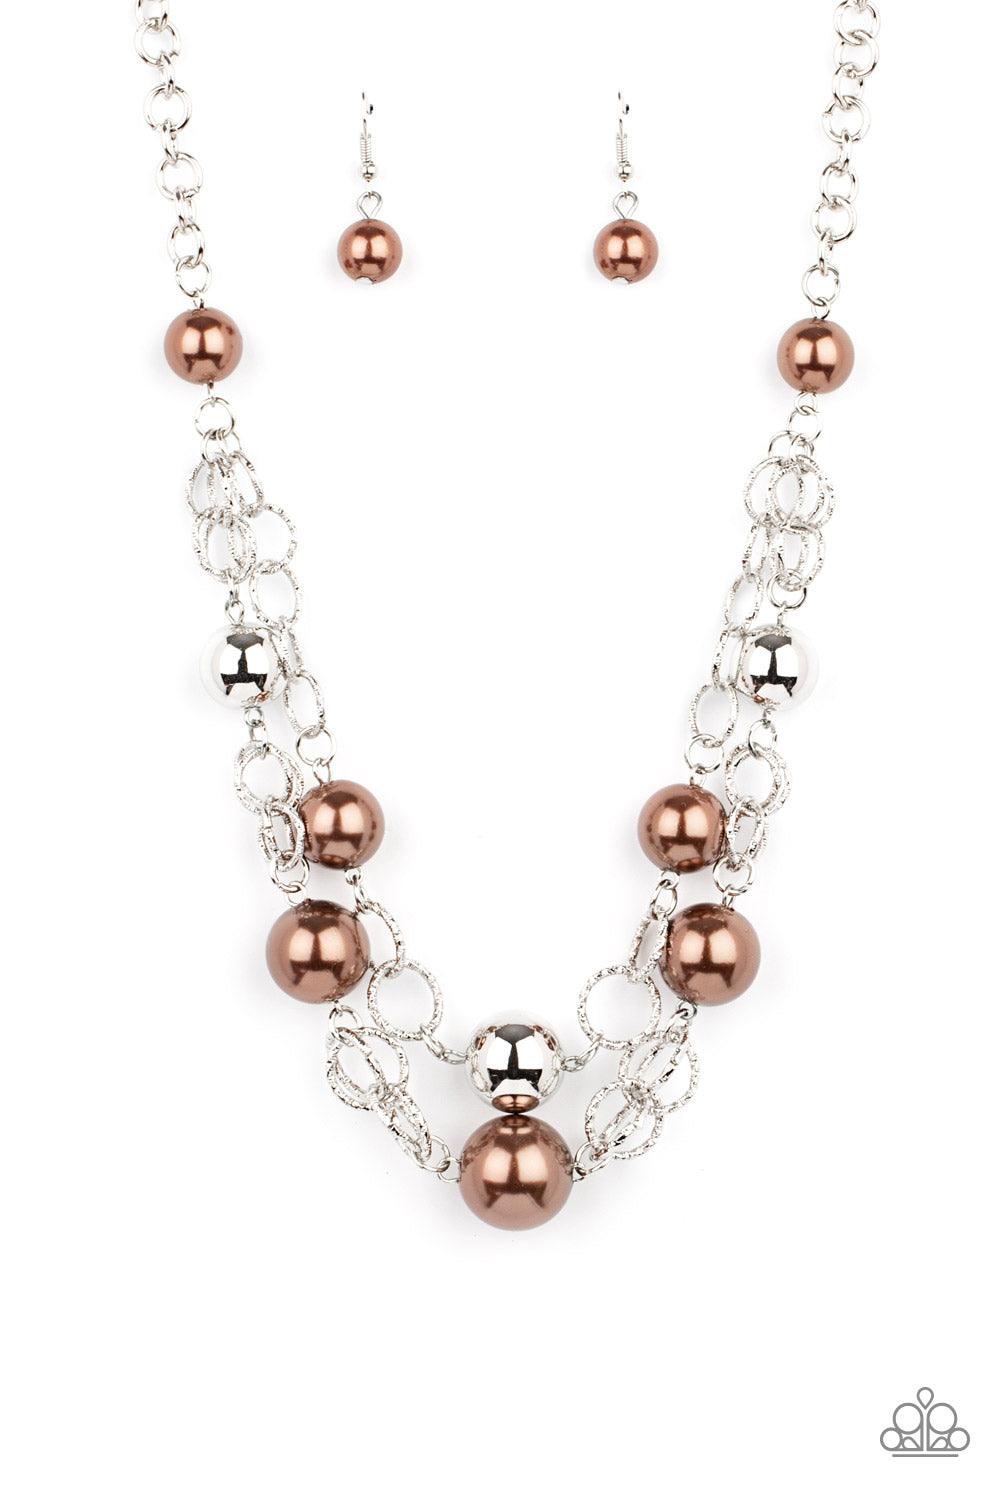 Paparazzi Accessories New Age Knockout - Brown Sections of oversized textured silver links, brown pearls, and shiny silver beads haphazardly connect into two timeless layers below the collar, creating a dramatically refined display. Features an adjustable